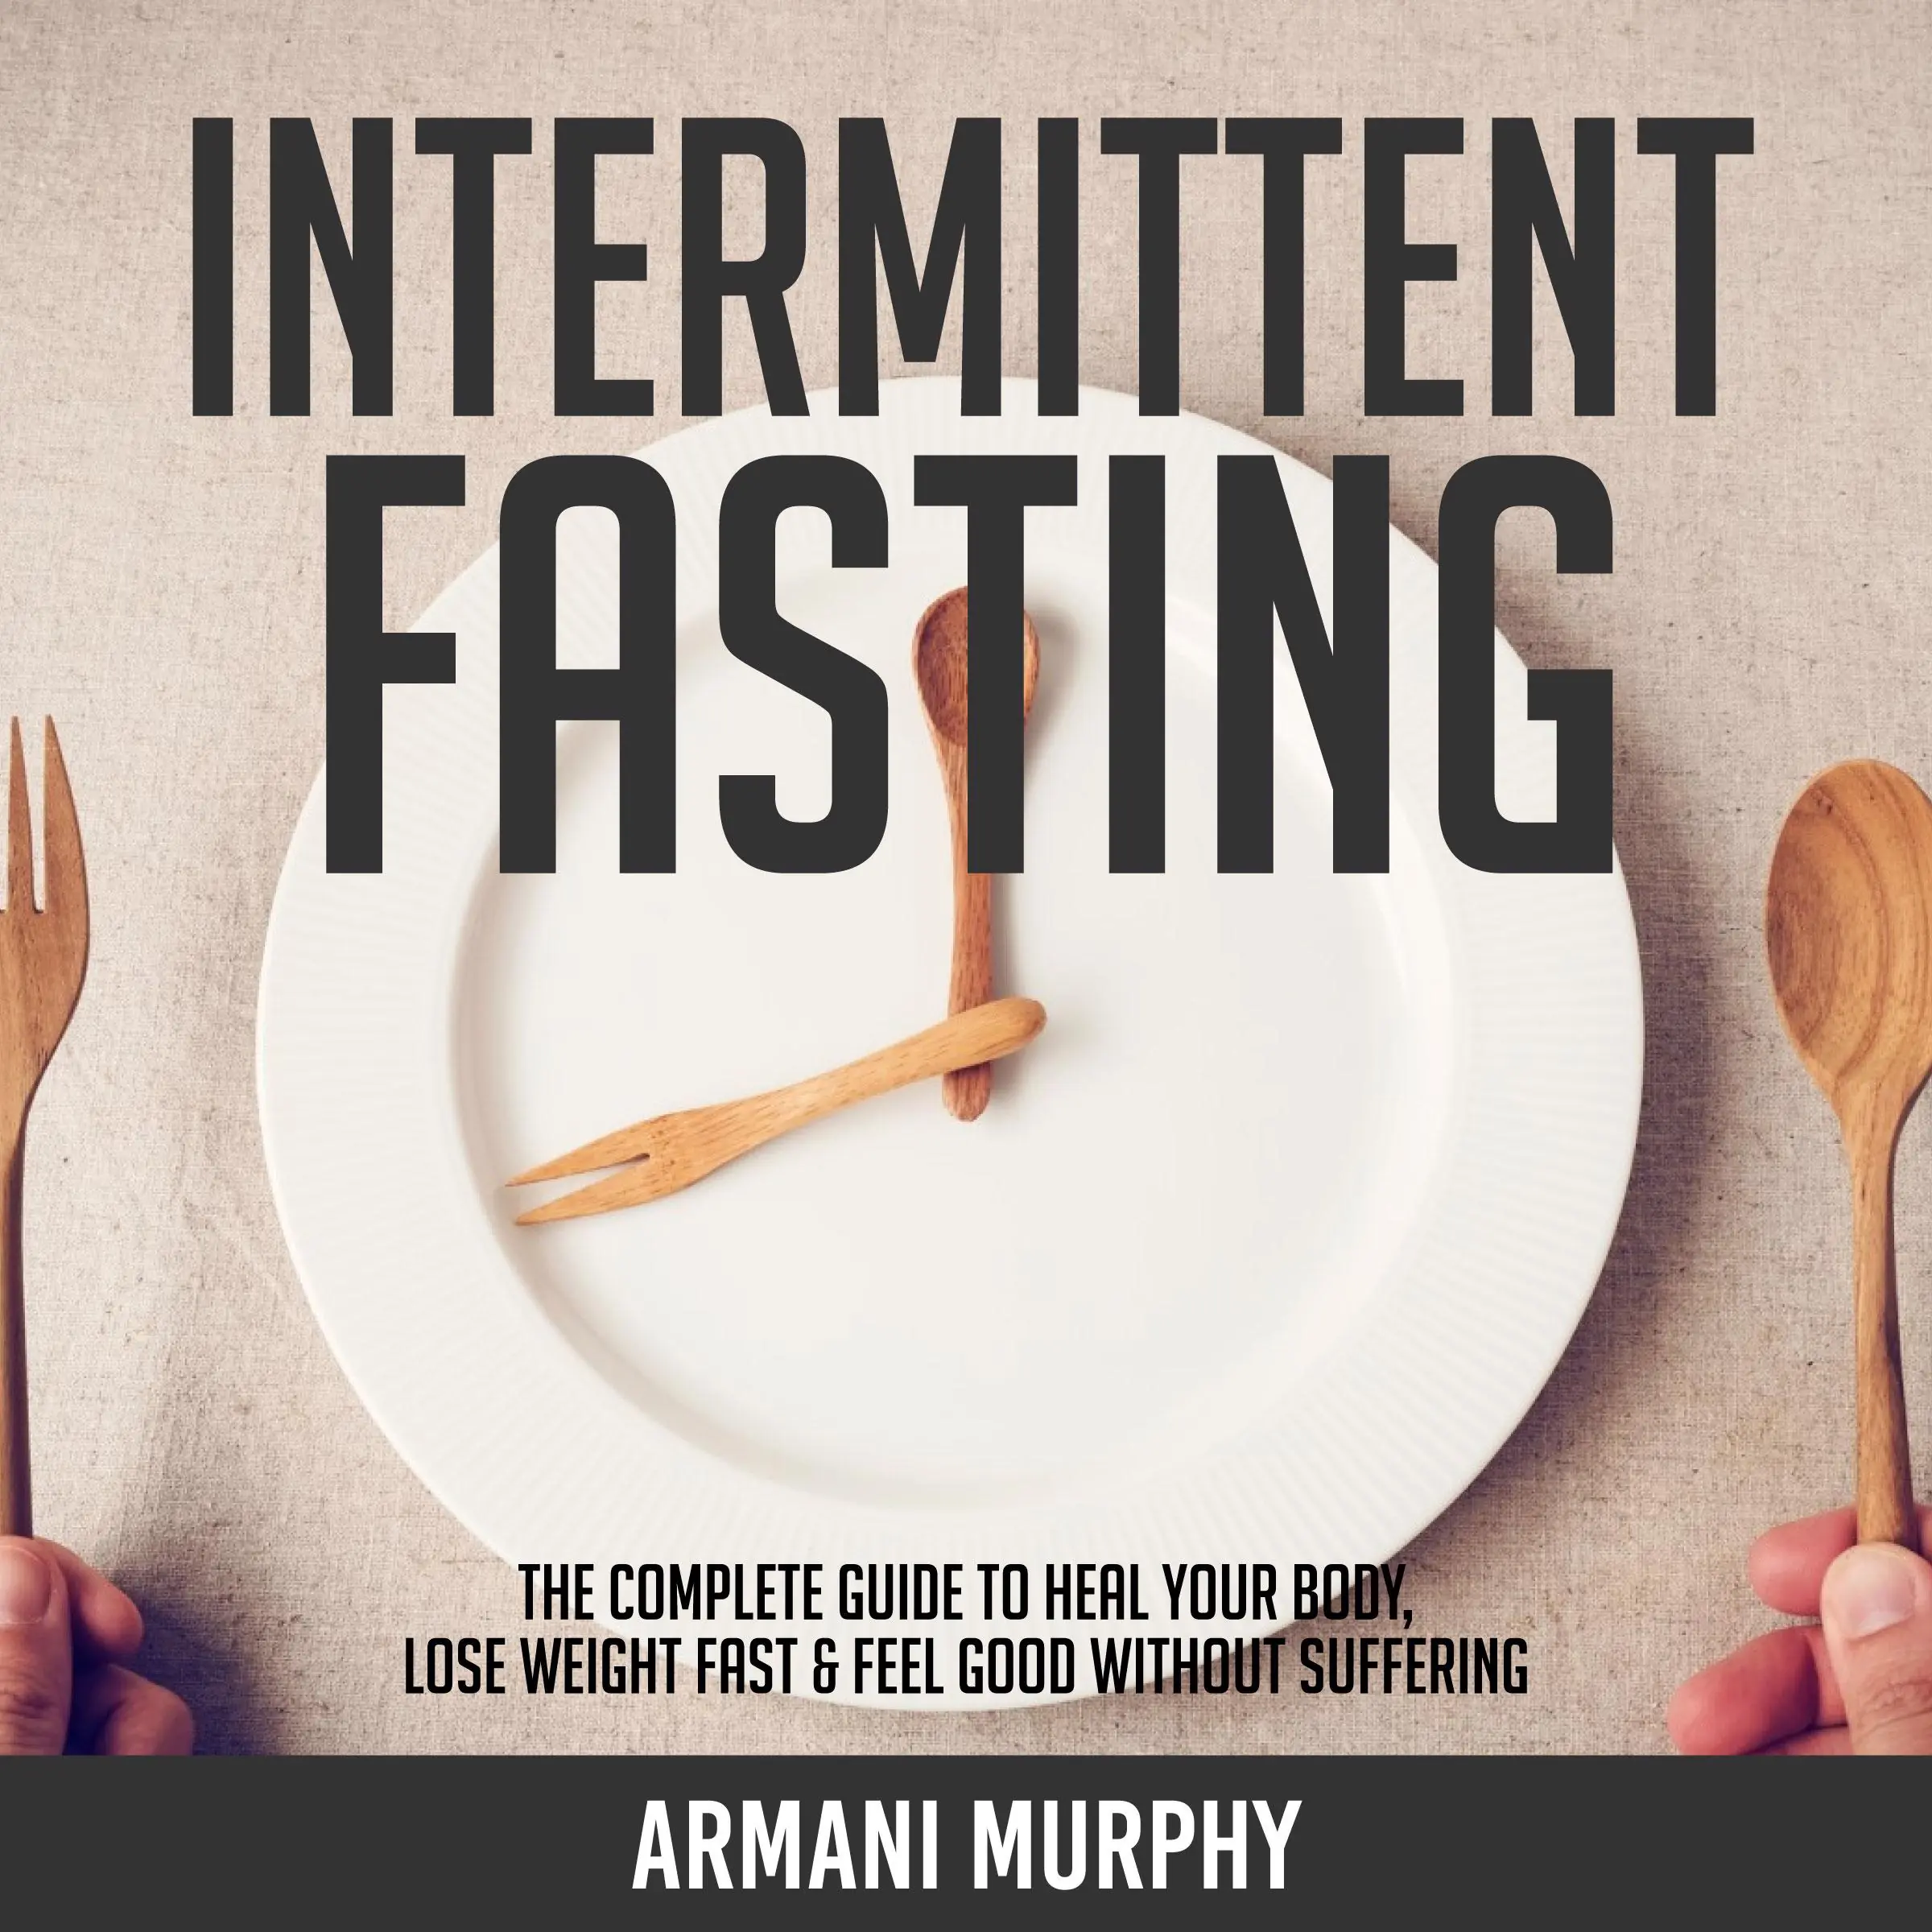 Intermittent Fasting: The Complete Guide to Heal Your Body, Lose Weight Fast & Feel Good Without Suffering Audiobook by Armani Murphy